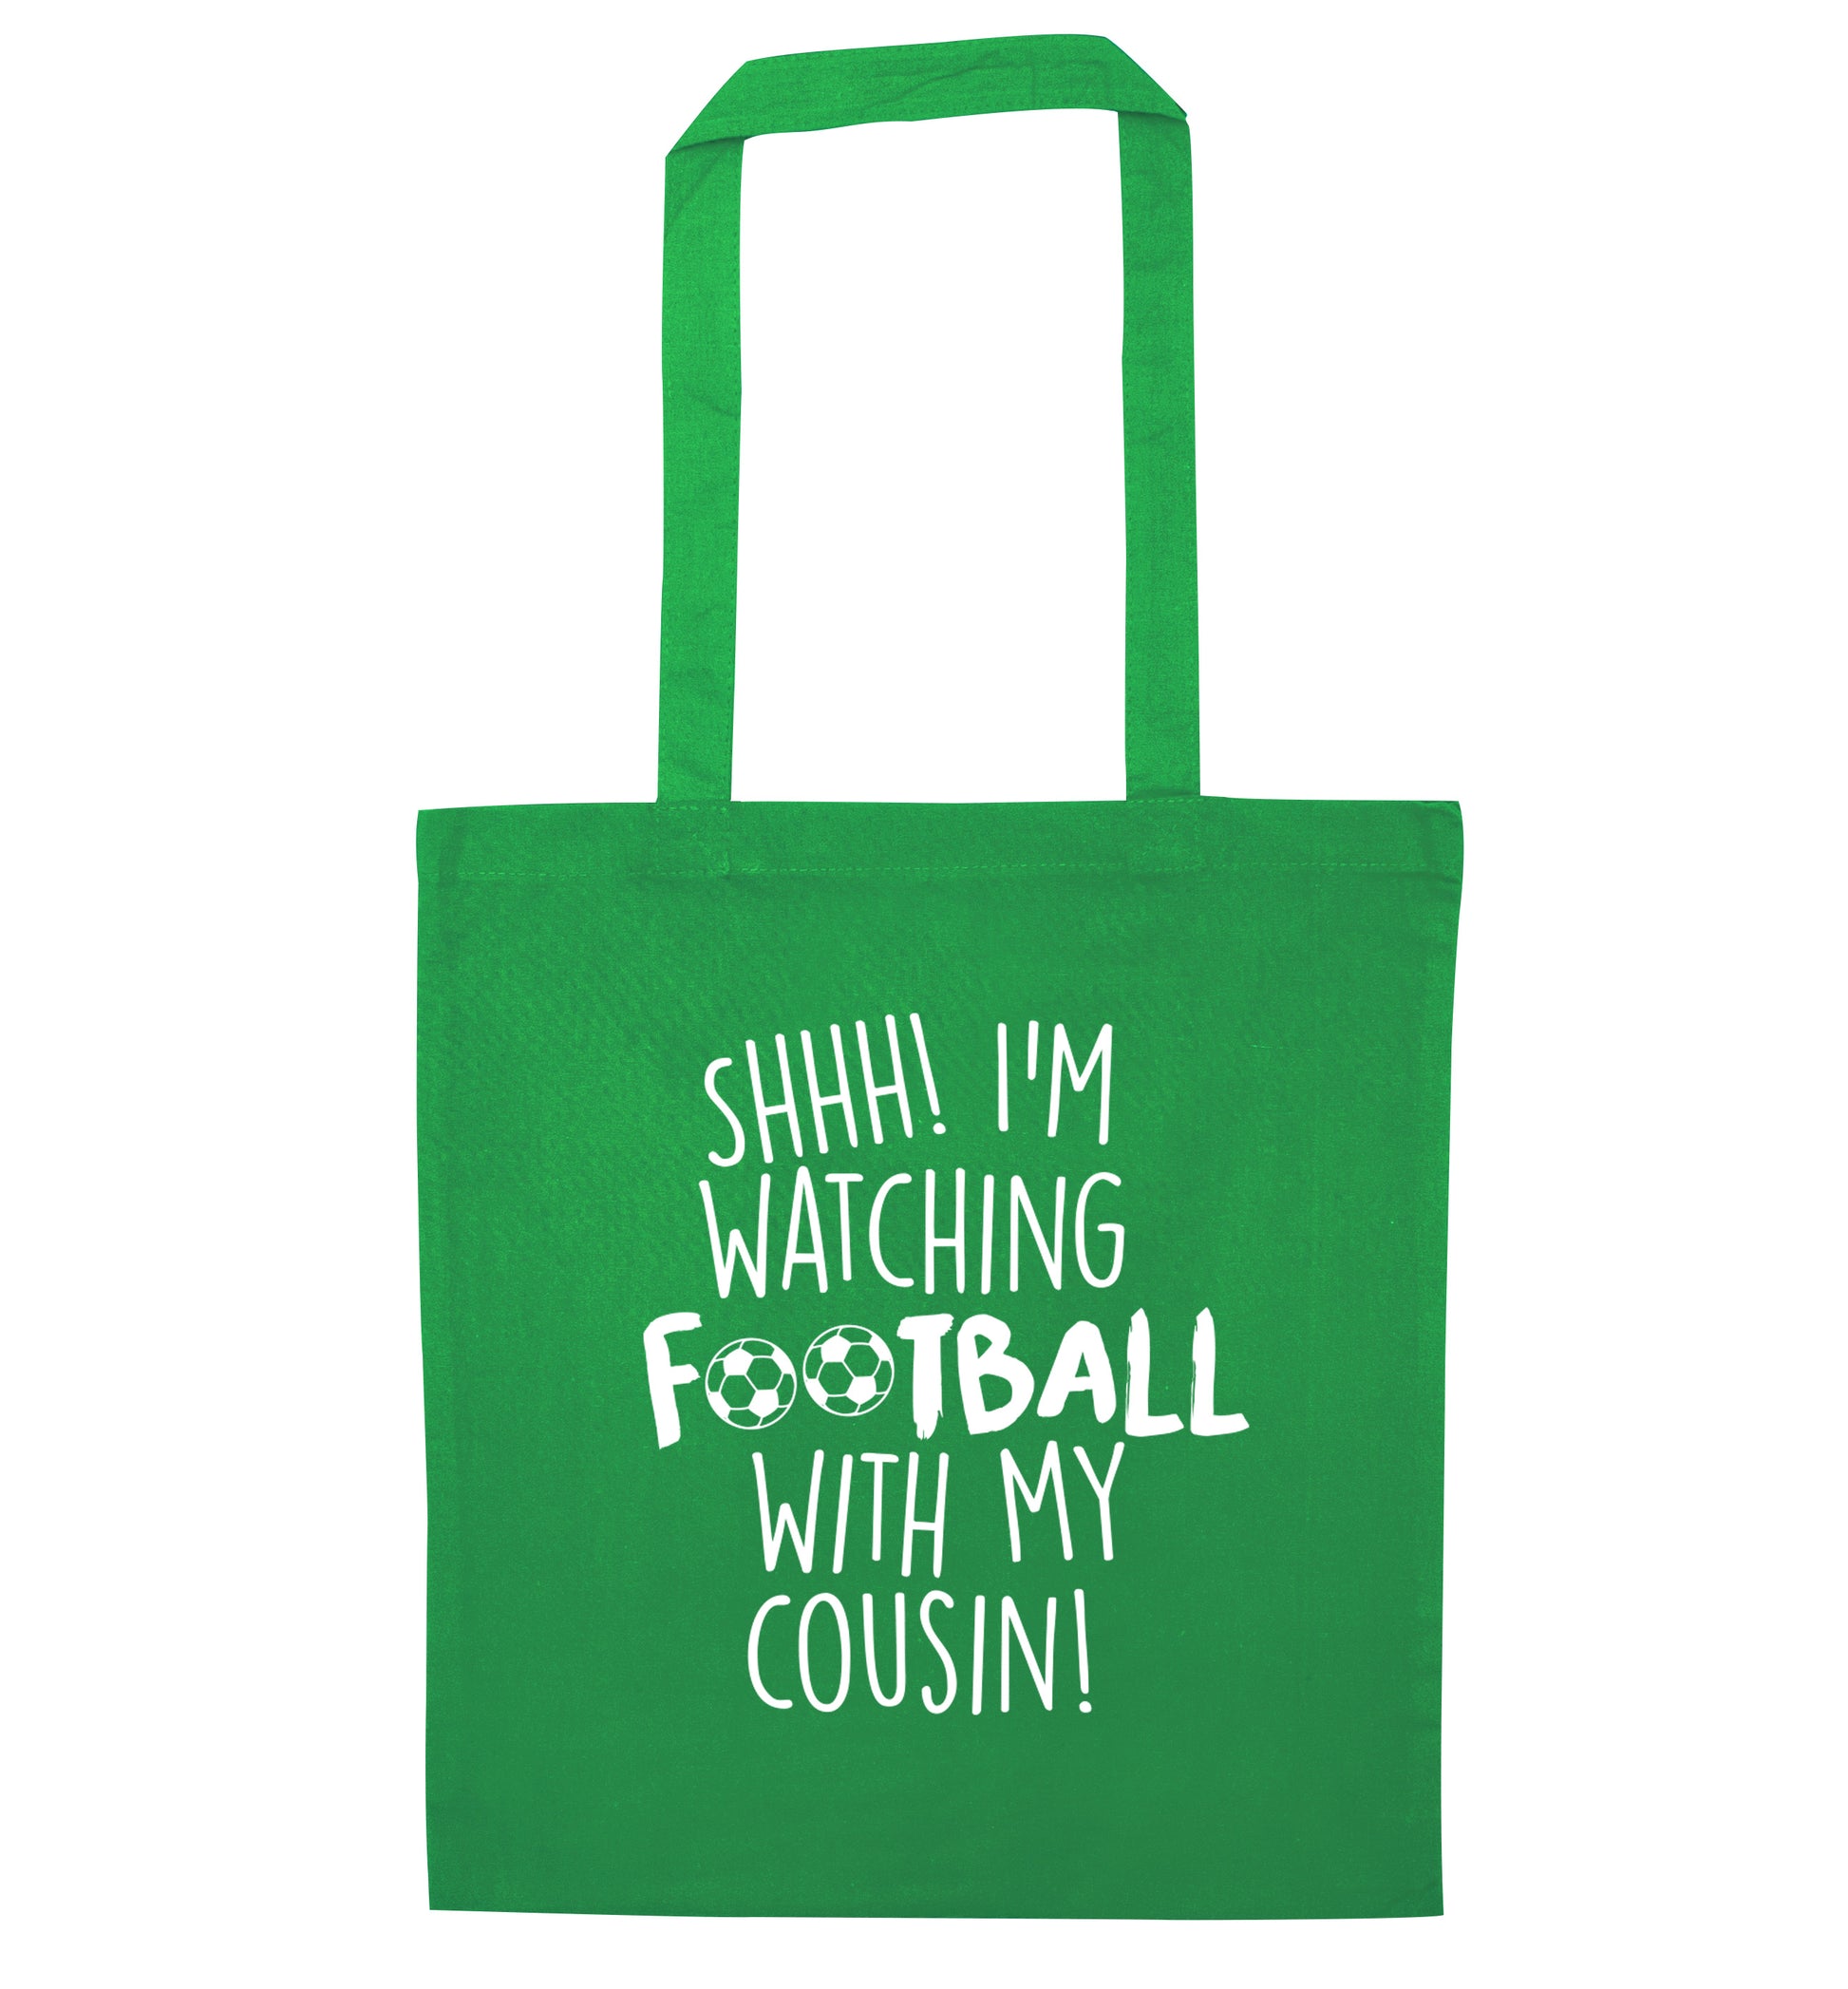 Shhh I'm watching football with my cousin green tote bag